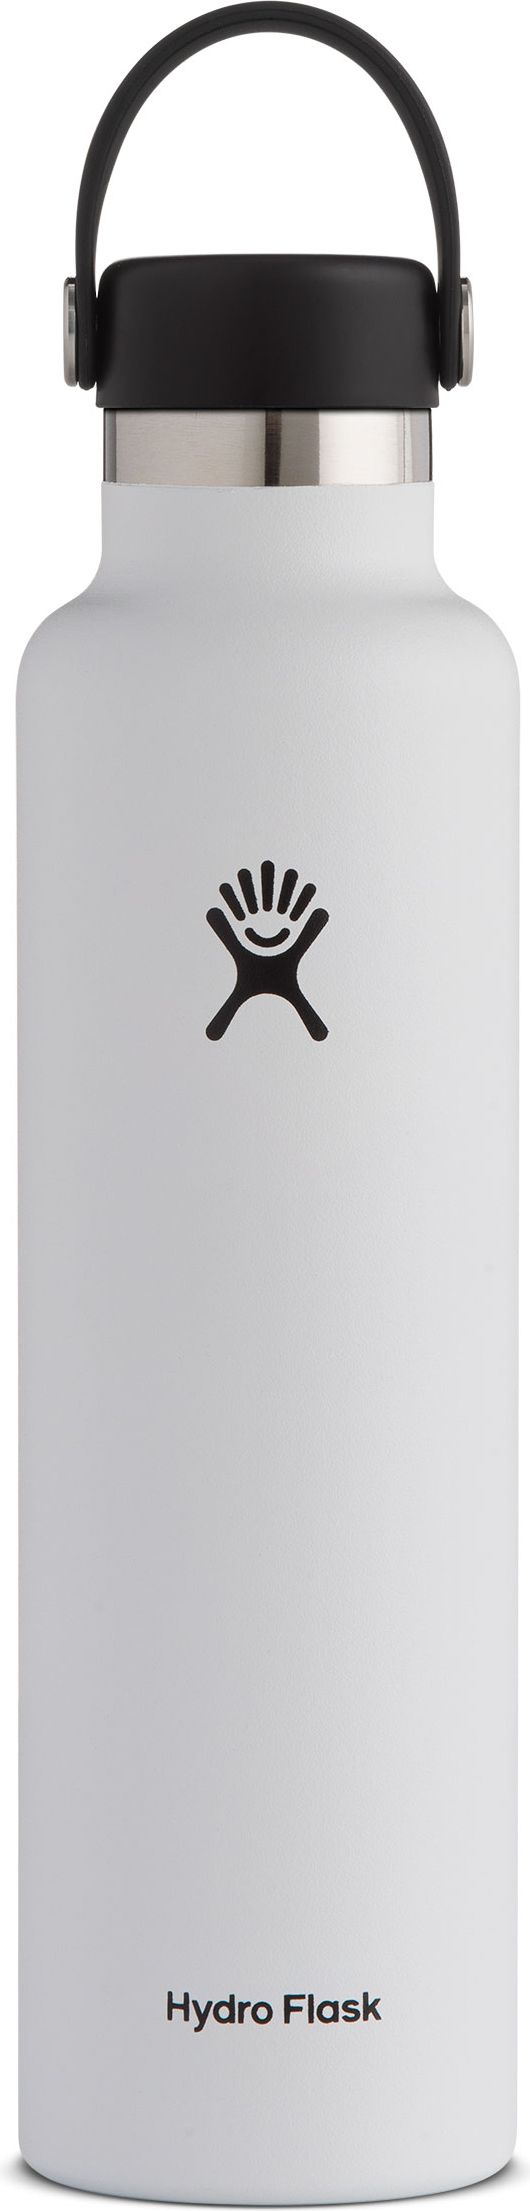 Hydro Flask Accessories 24oz Standard Mouth White